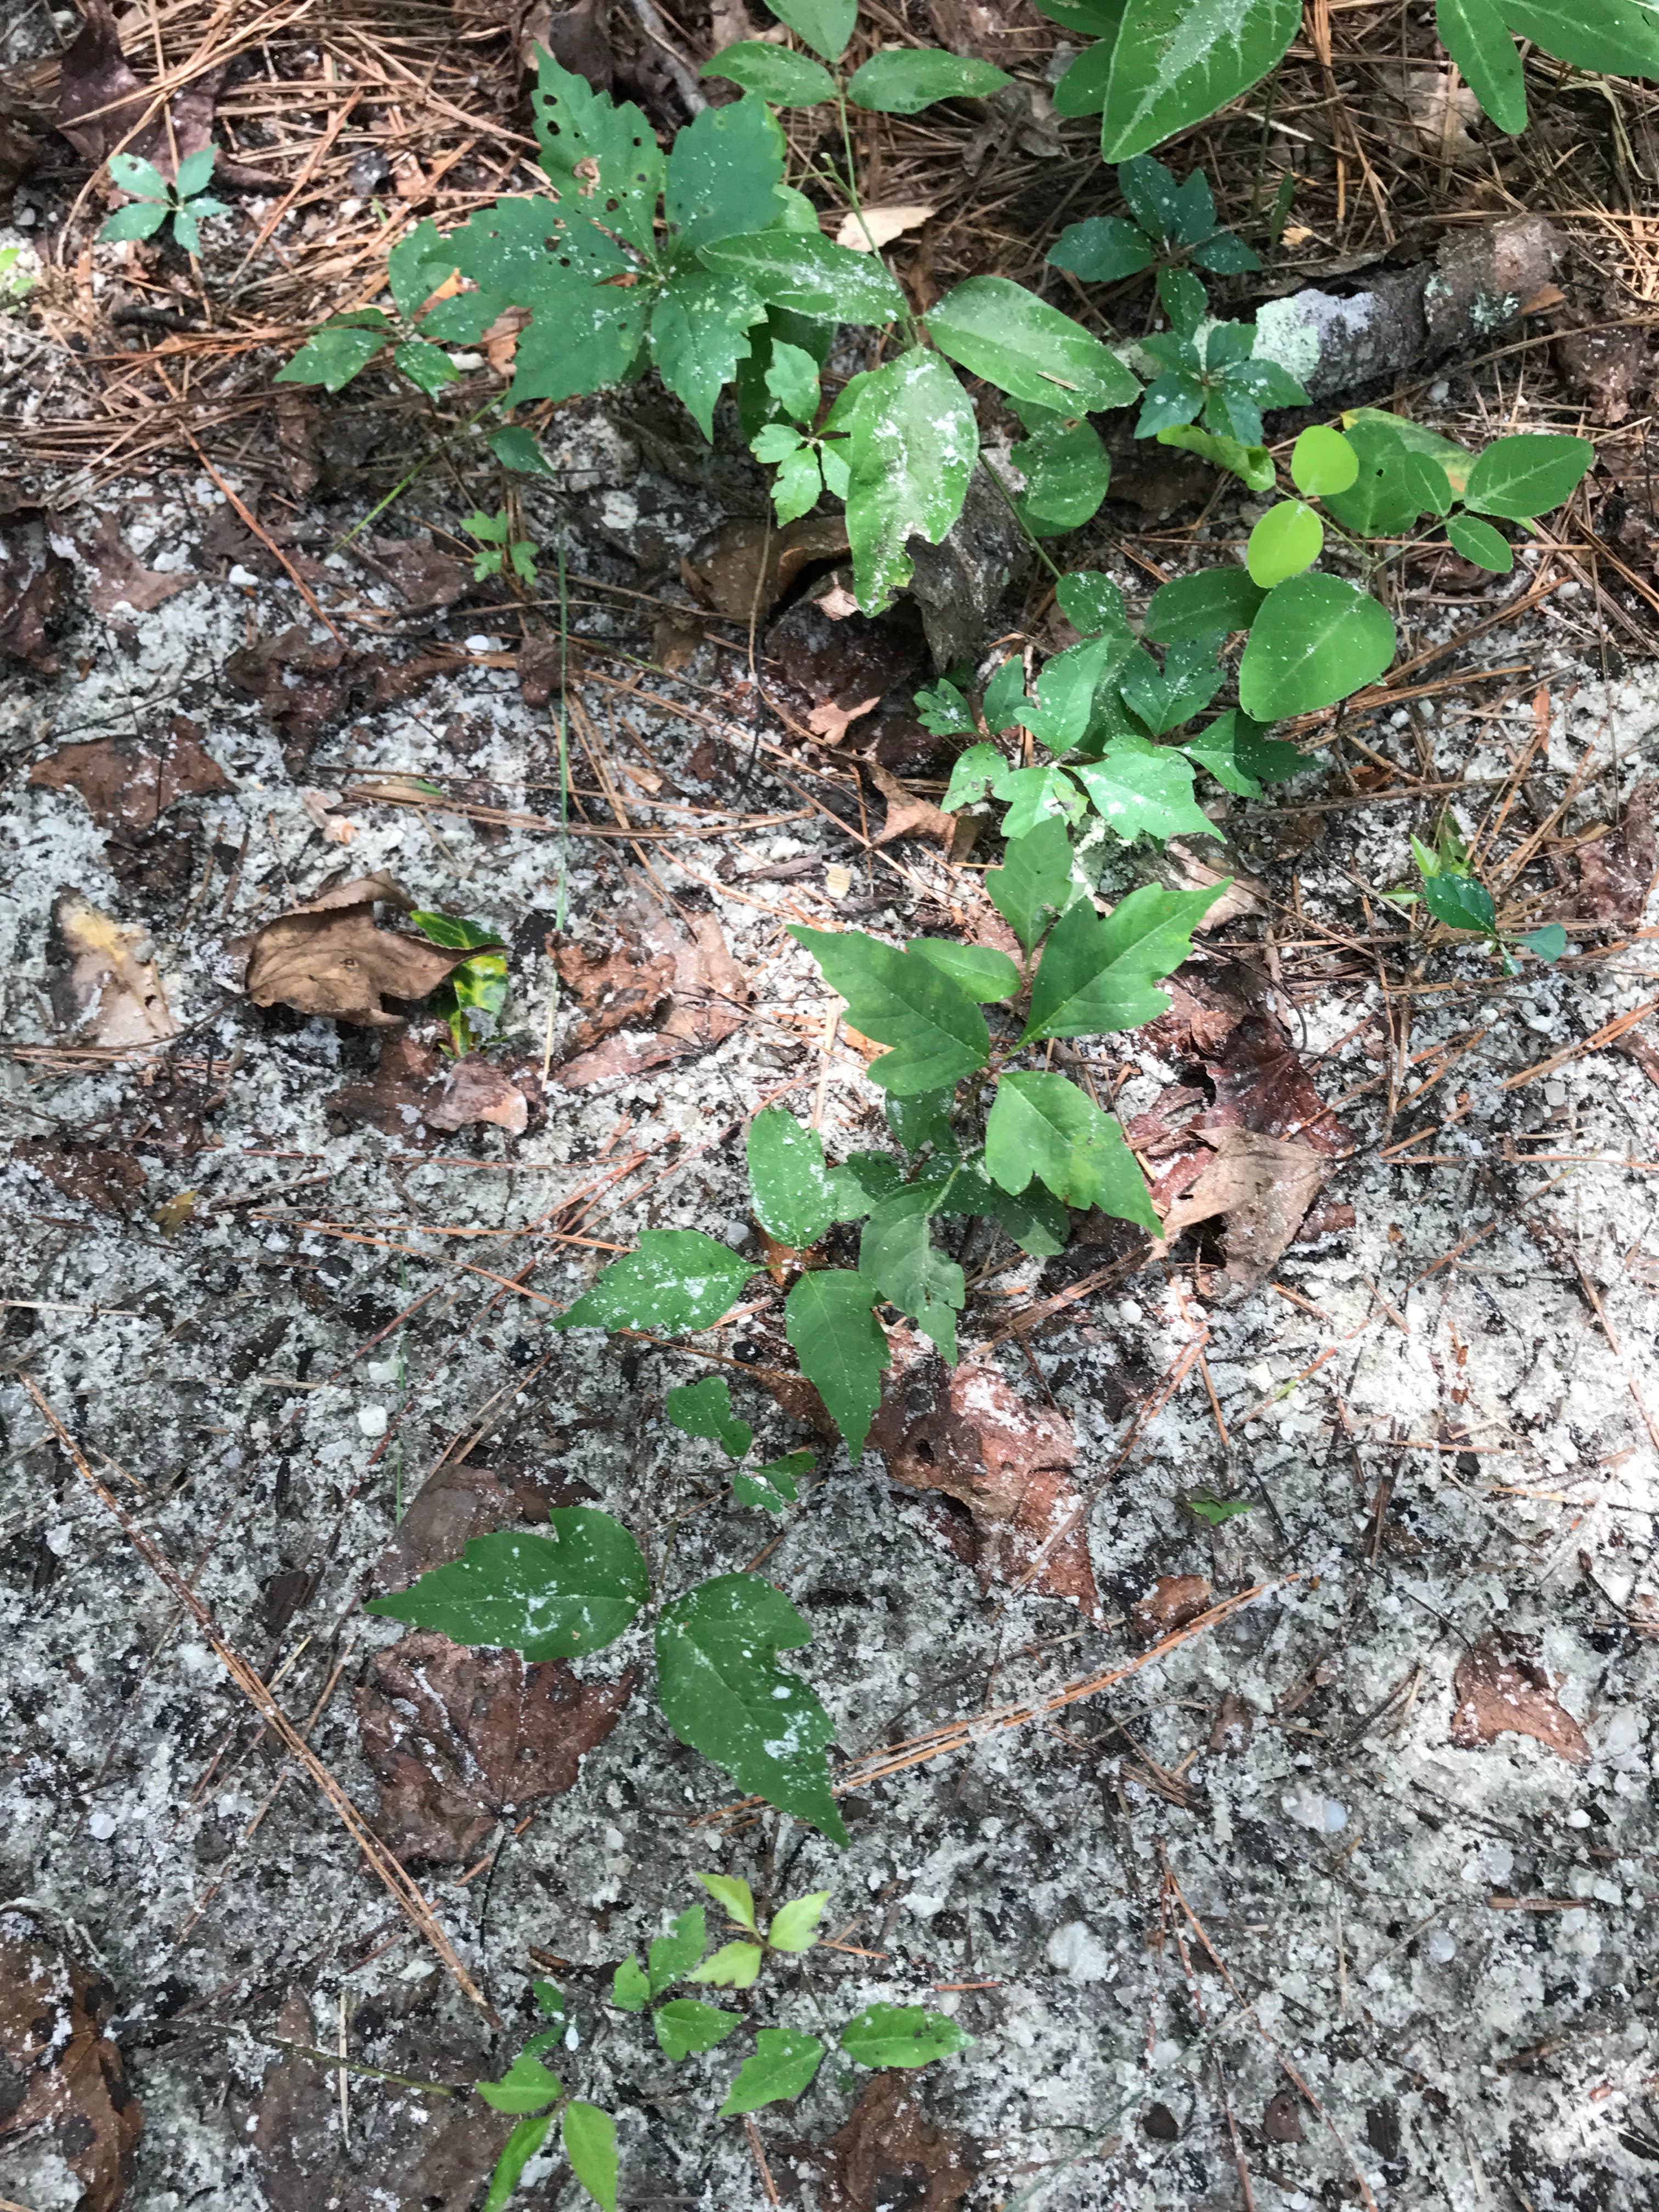 Tons of poison ivy around the hike-in sites